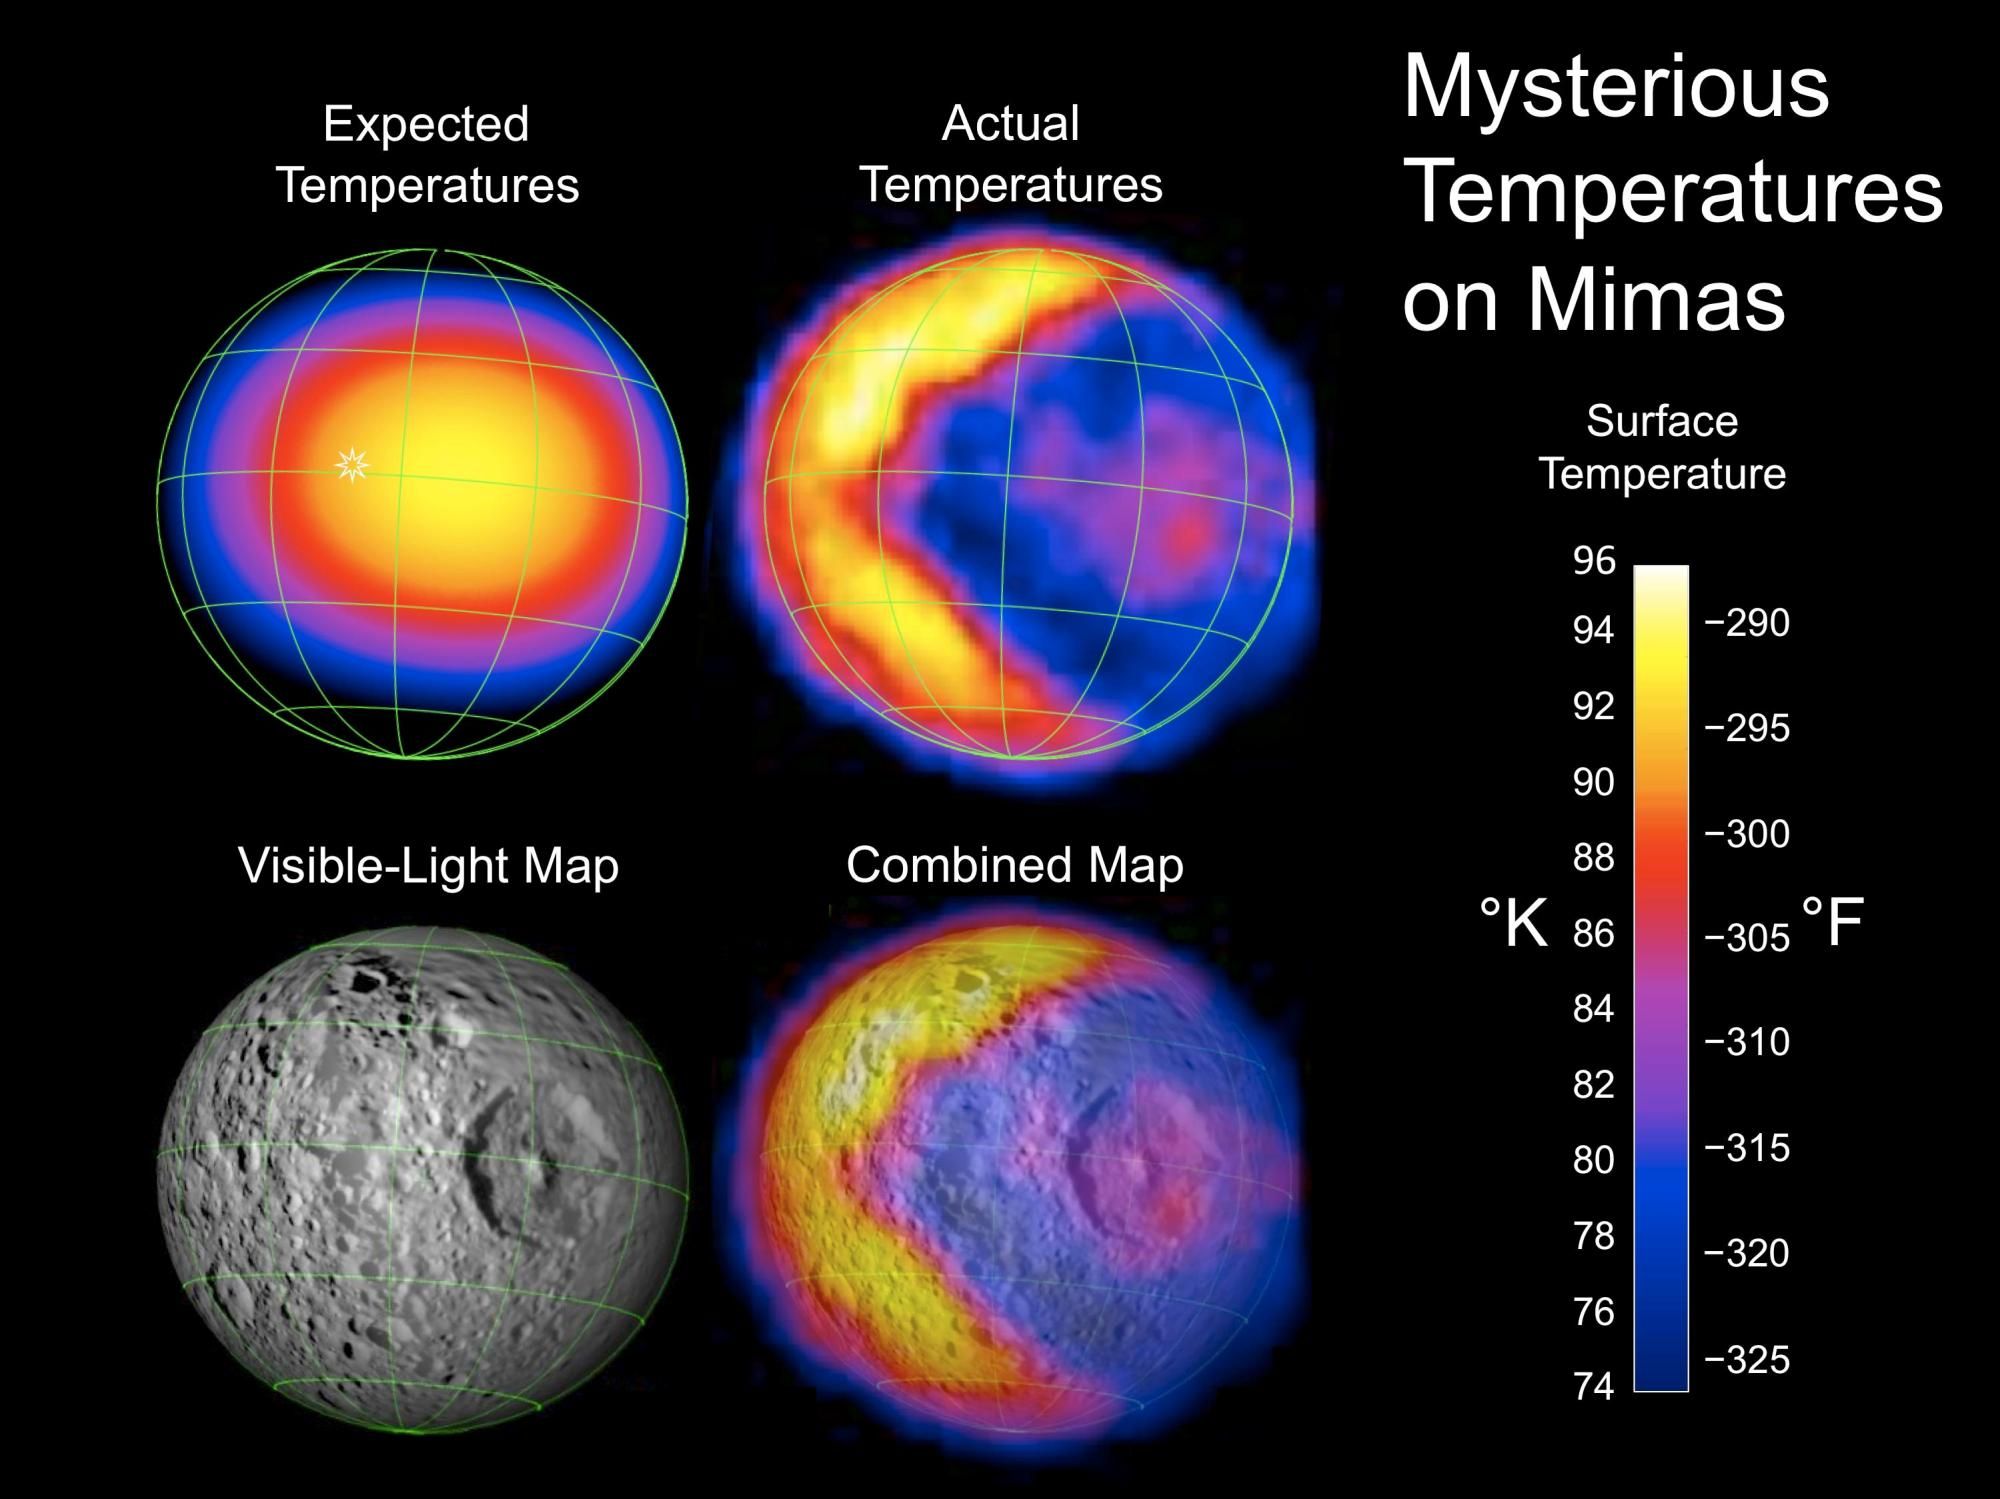 This figure illustrates the bizarre pattern of daytime temperatures found on Mimas